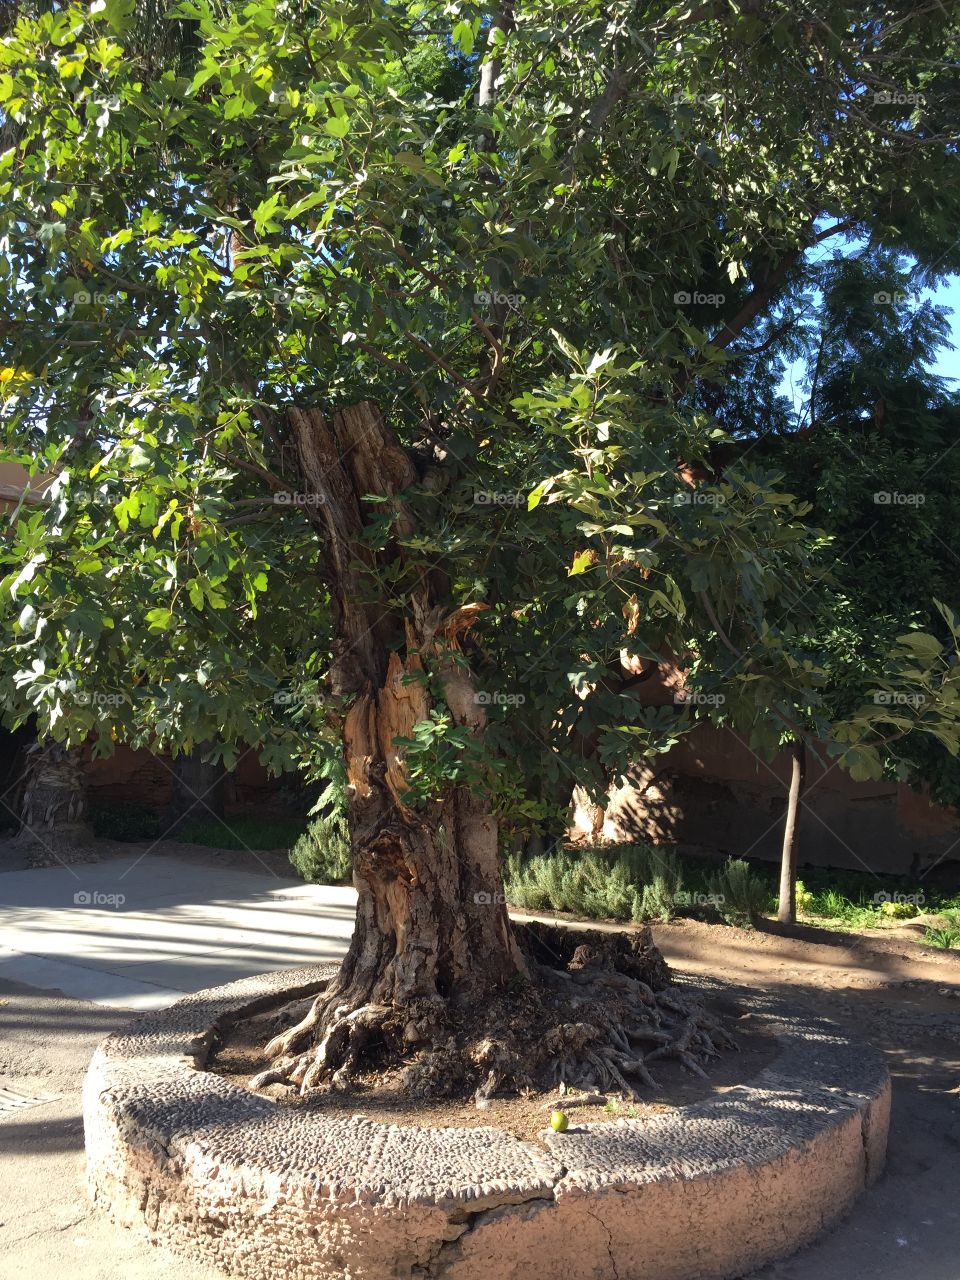 500 year old Moroccan olive tree